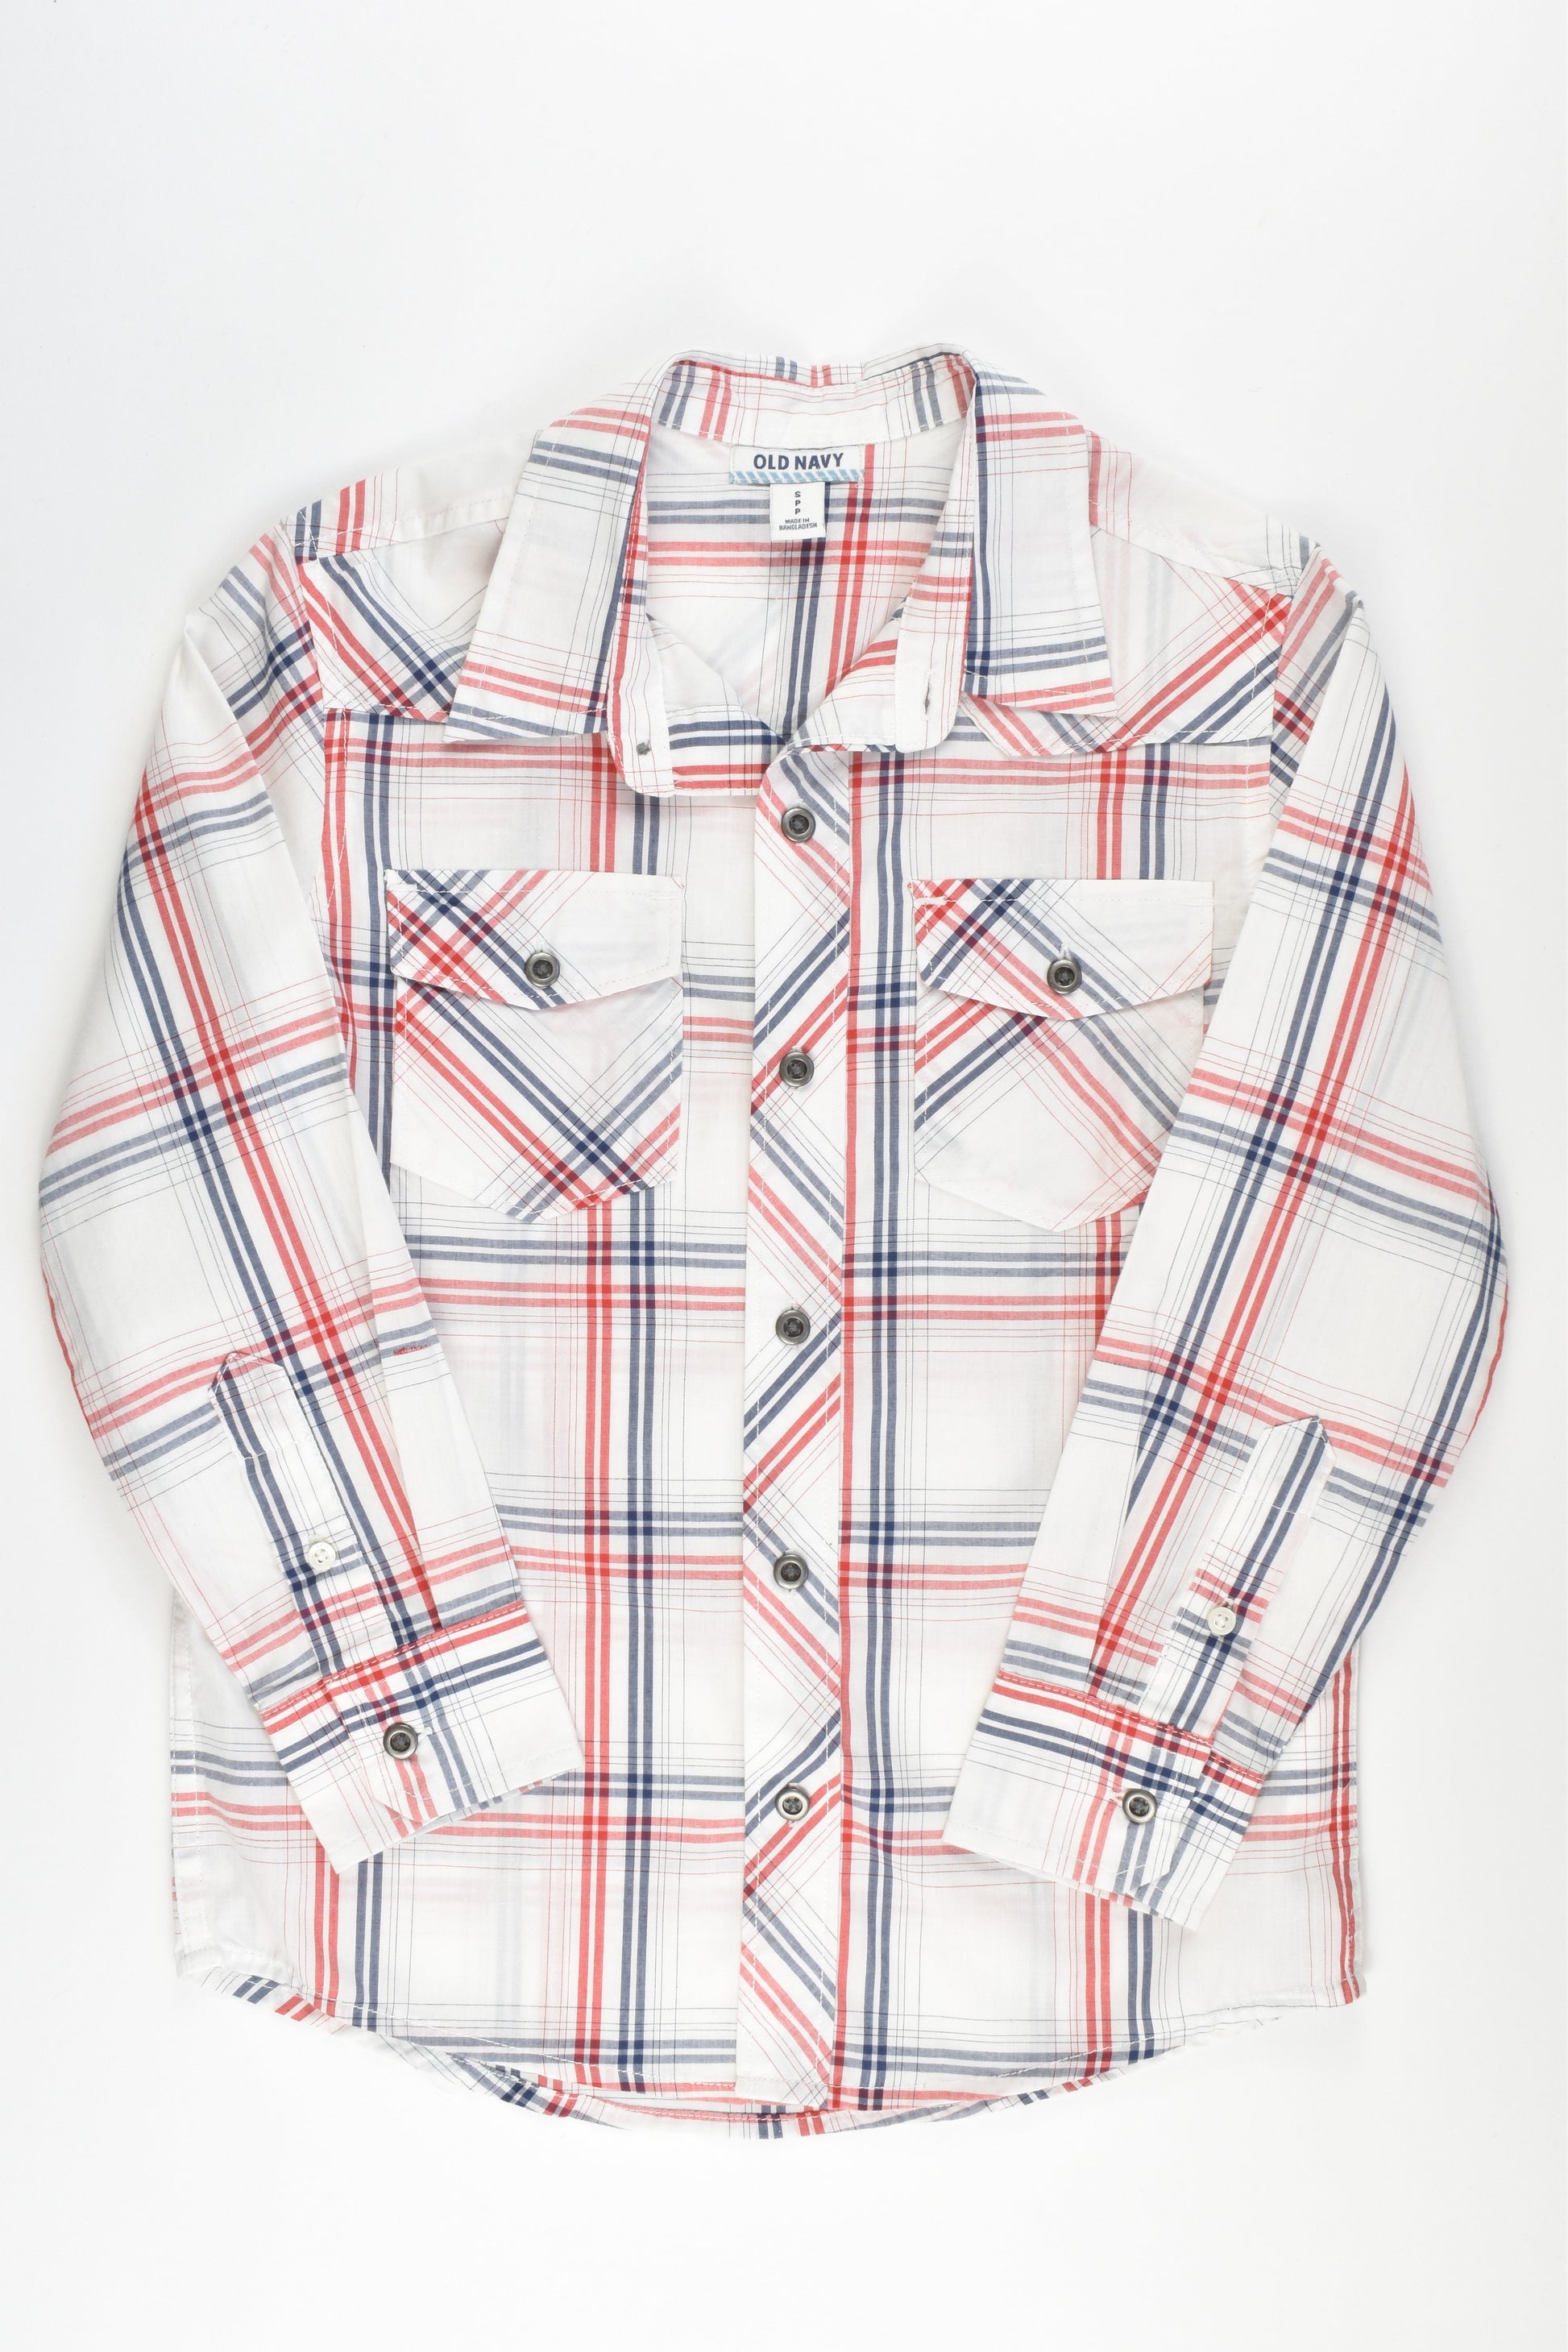 NEW Old Navy Size 7-8 Collared Shirt